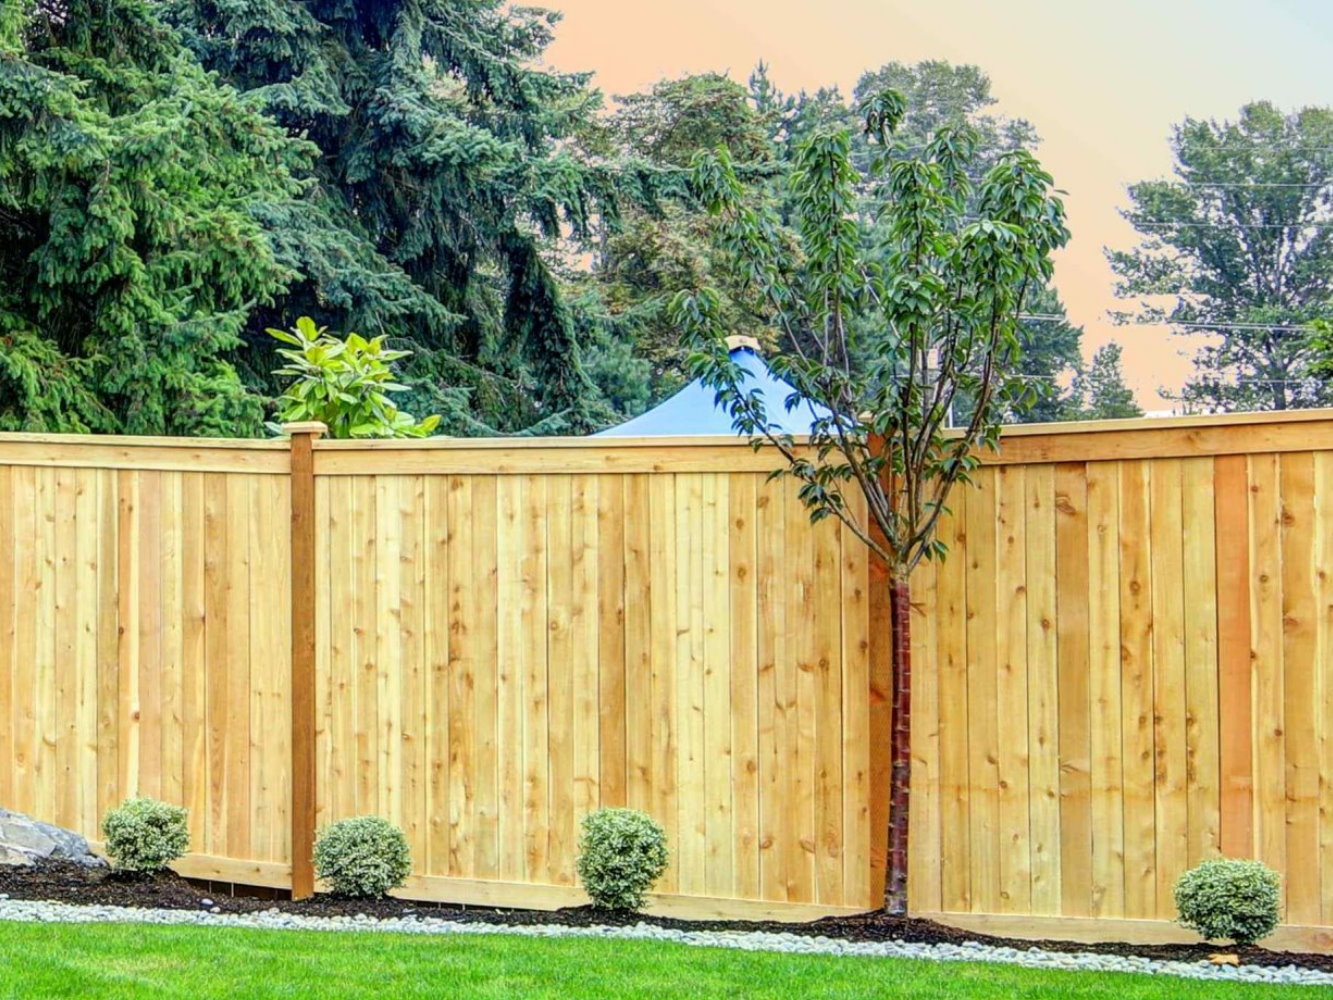 Santee SC cap and trim style wood fence